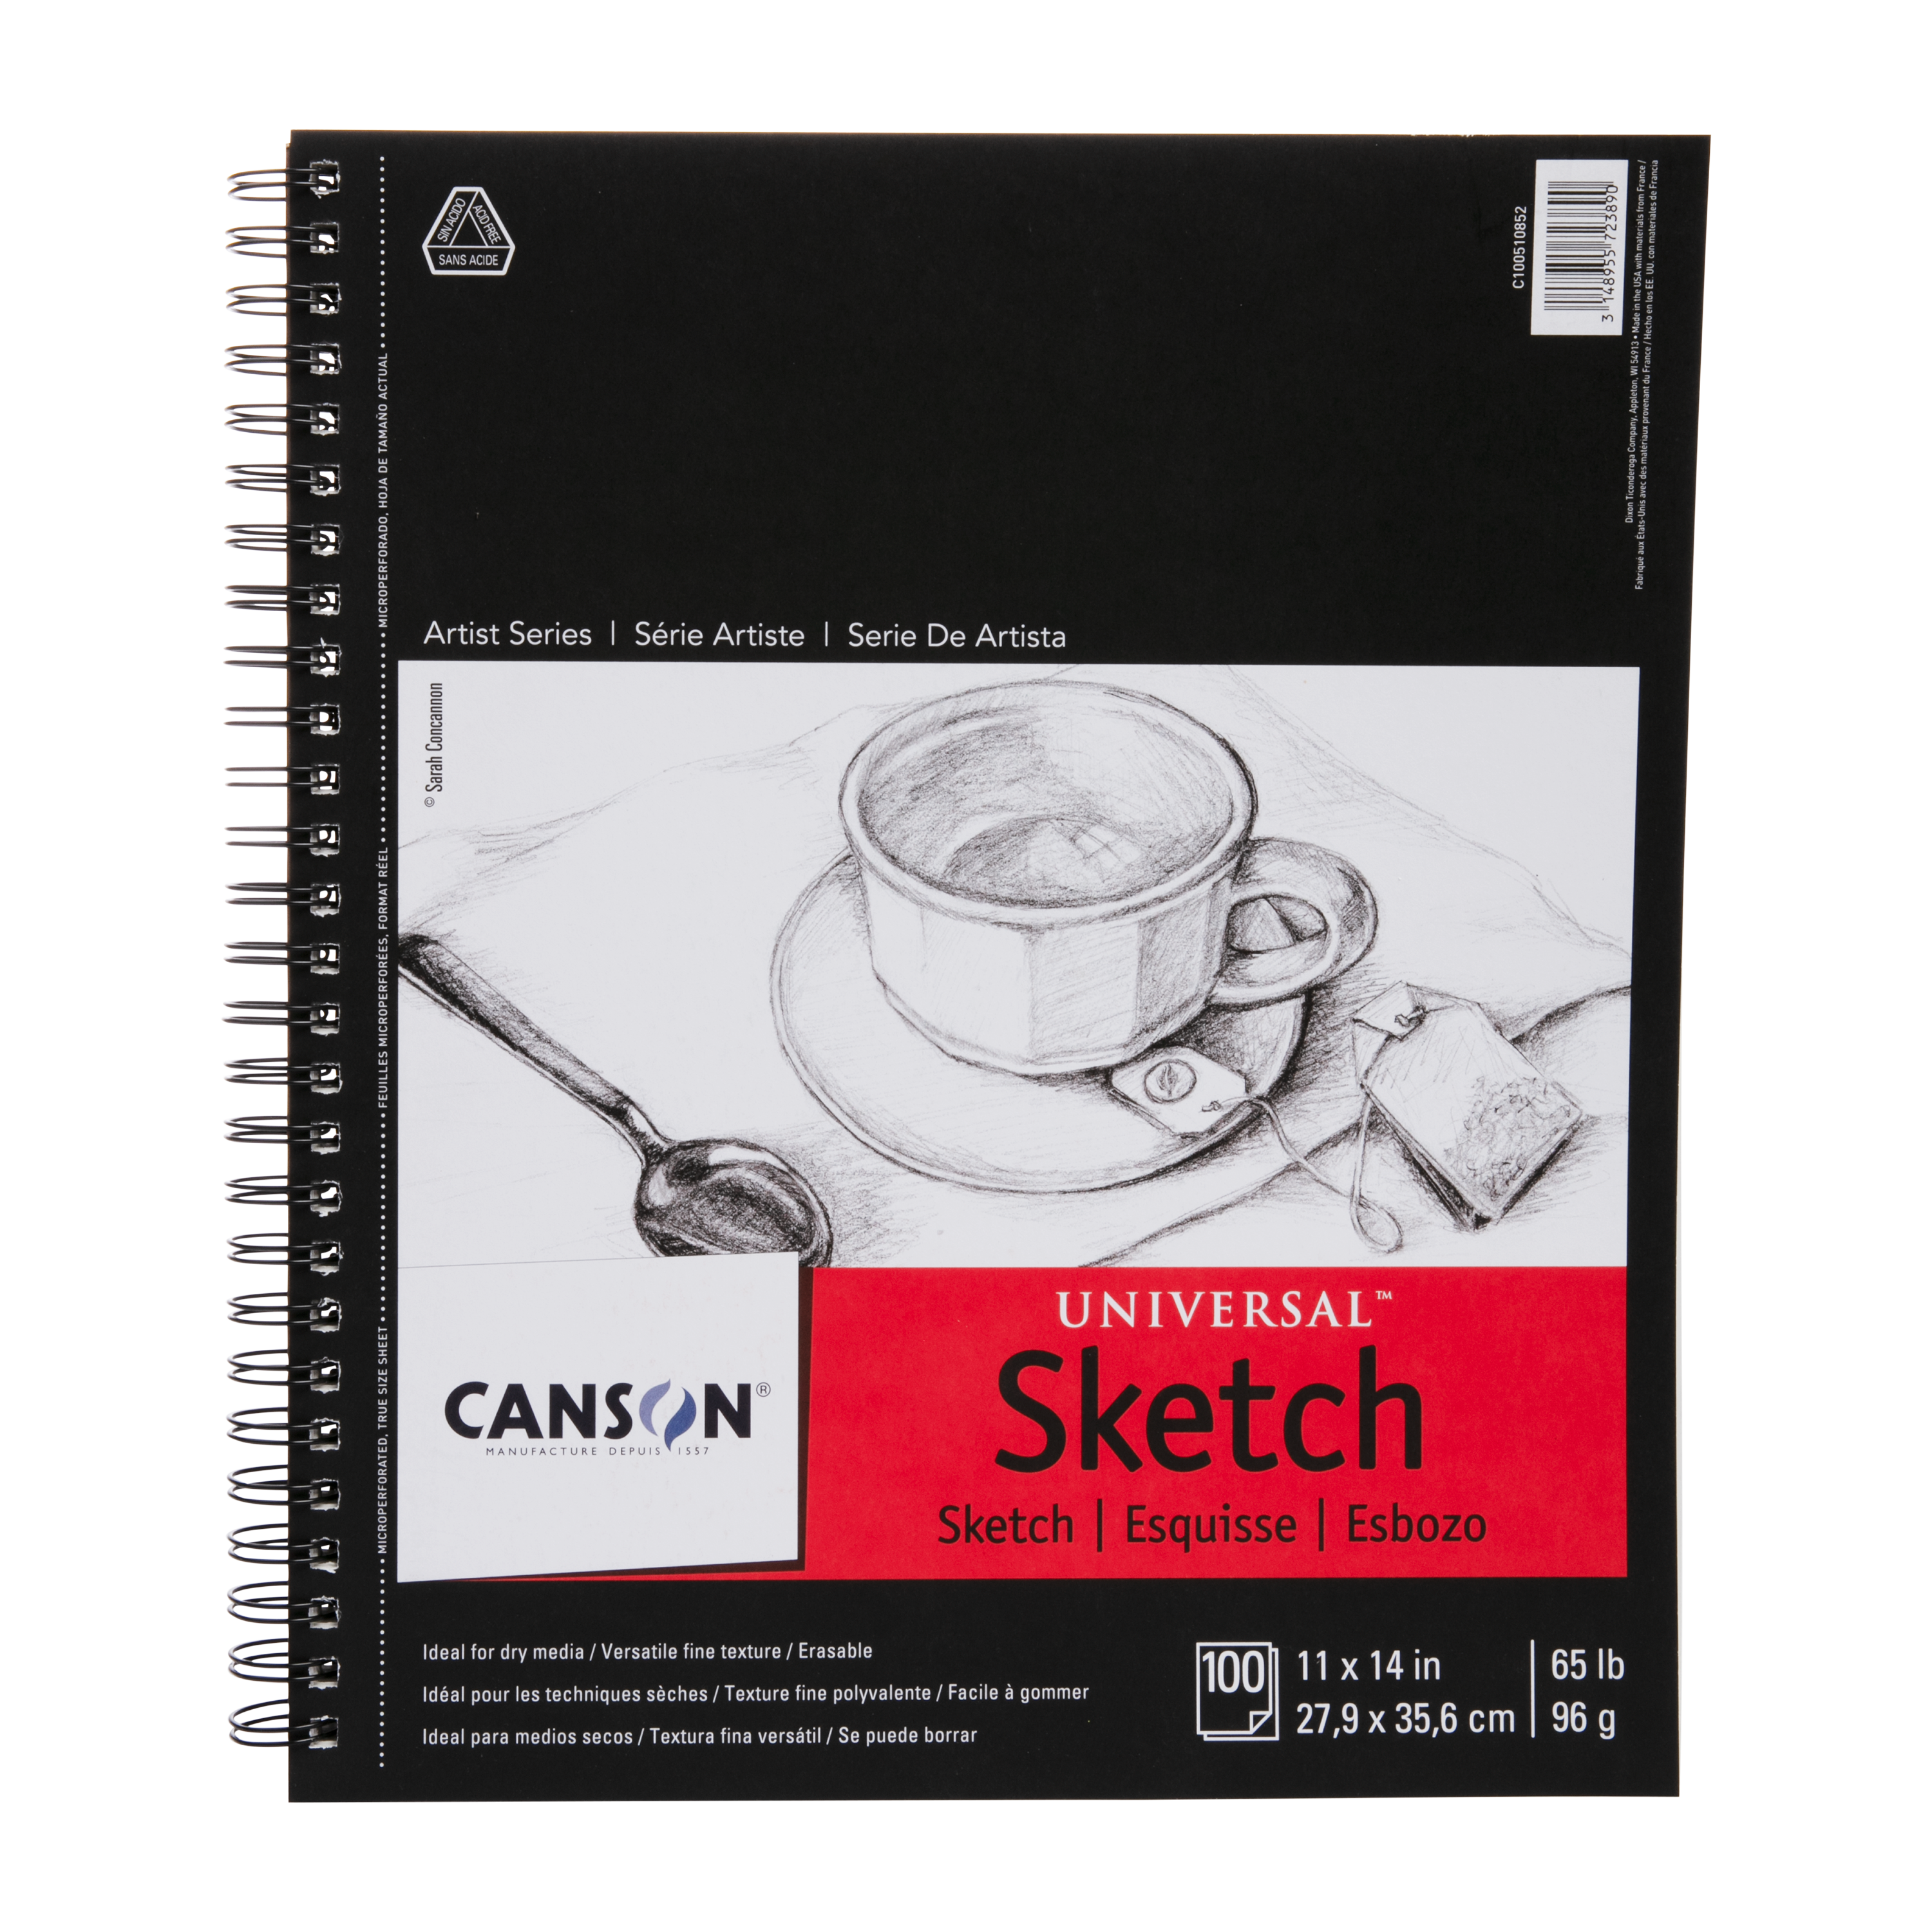 https://www.shopriot.shop/wp-content/uploads/1689/02/there-is-a-large-variety-of-canson-universal-spiral-sketch-book-11x14-100-sheets-956-that-are-available_0.png